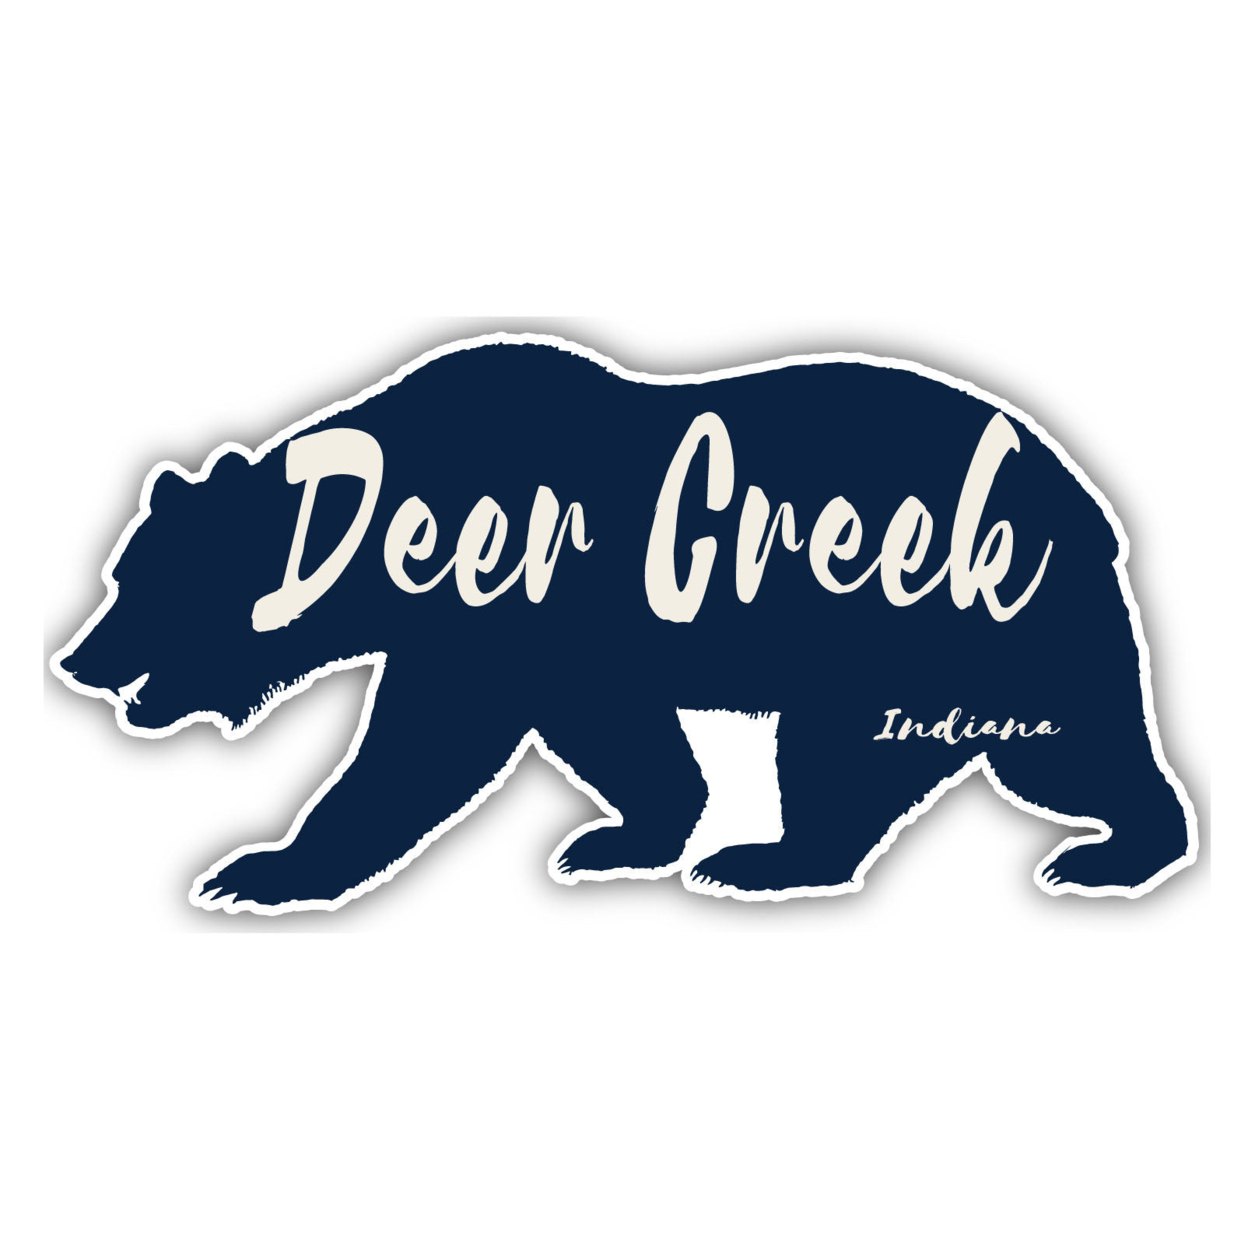 Deer Creek Indiana Souvenir Decorative Stickers (Choose Theme And Size) - Single Unit, 4-Inch, Great Outdoors